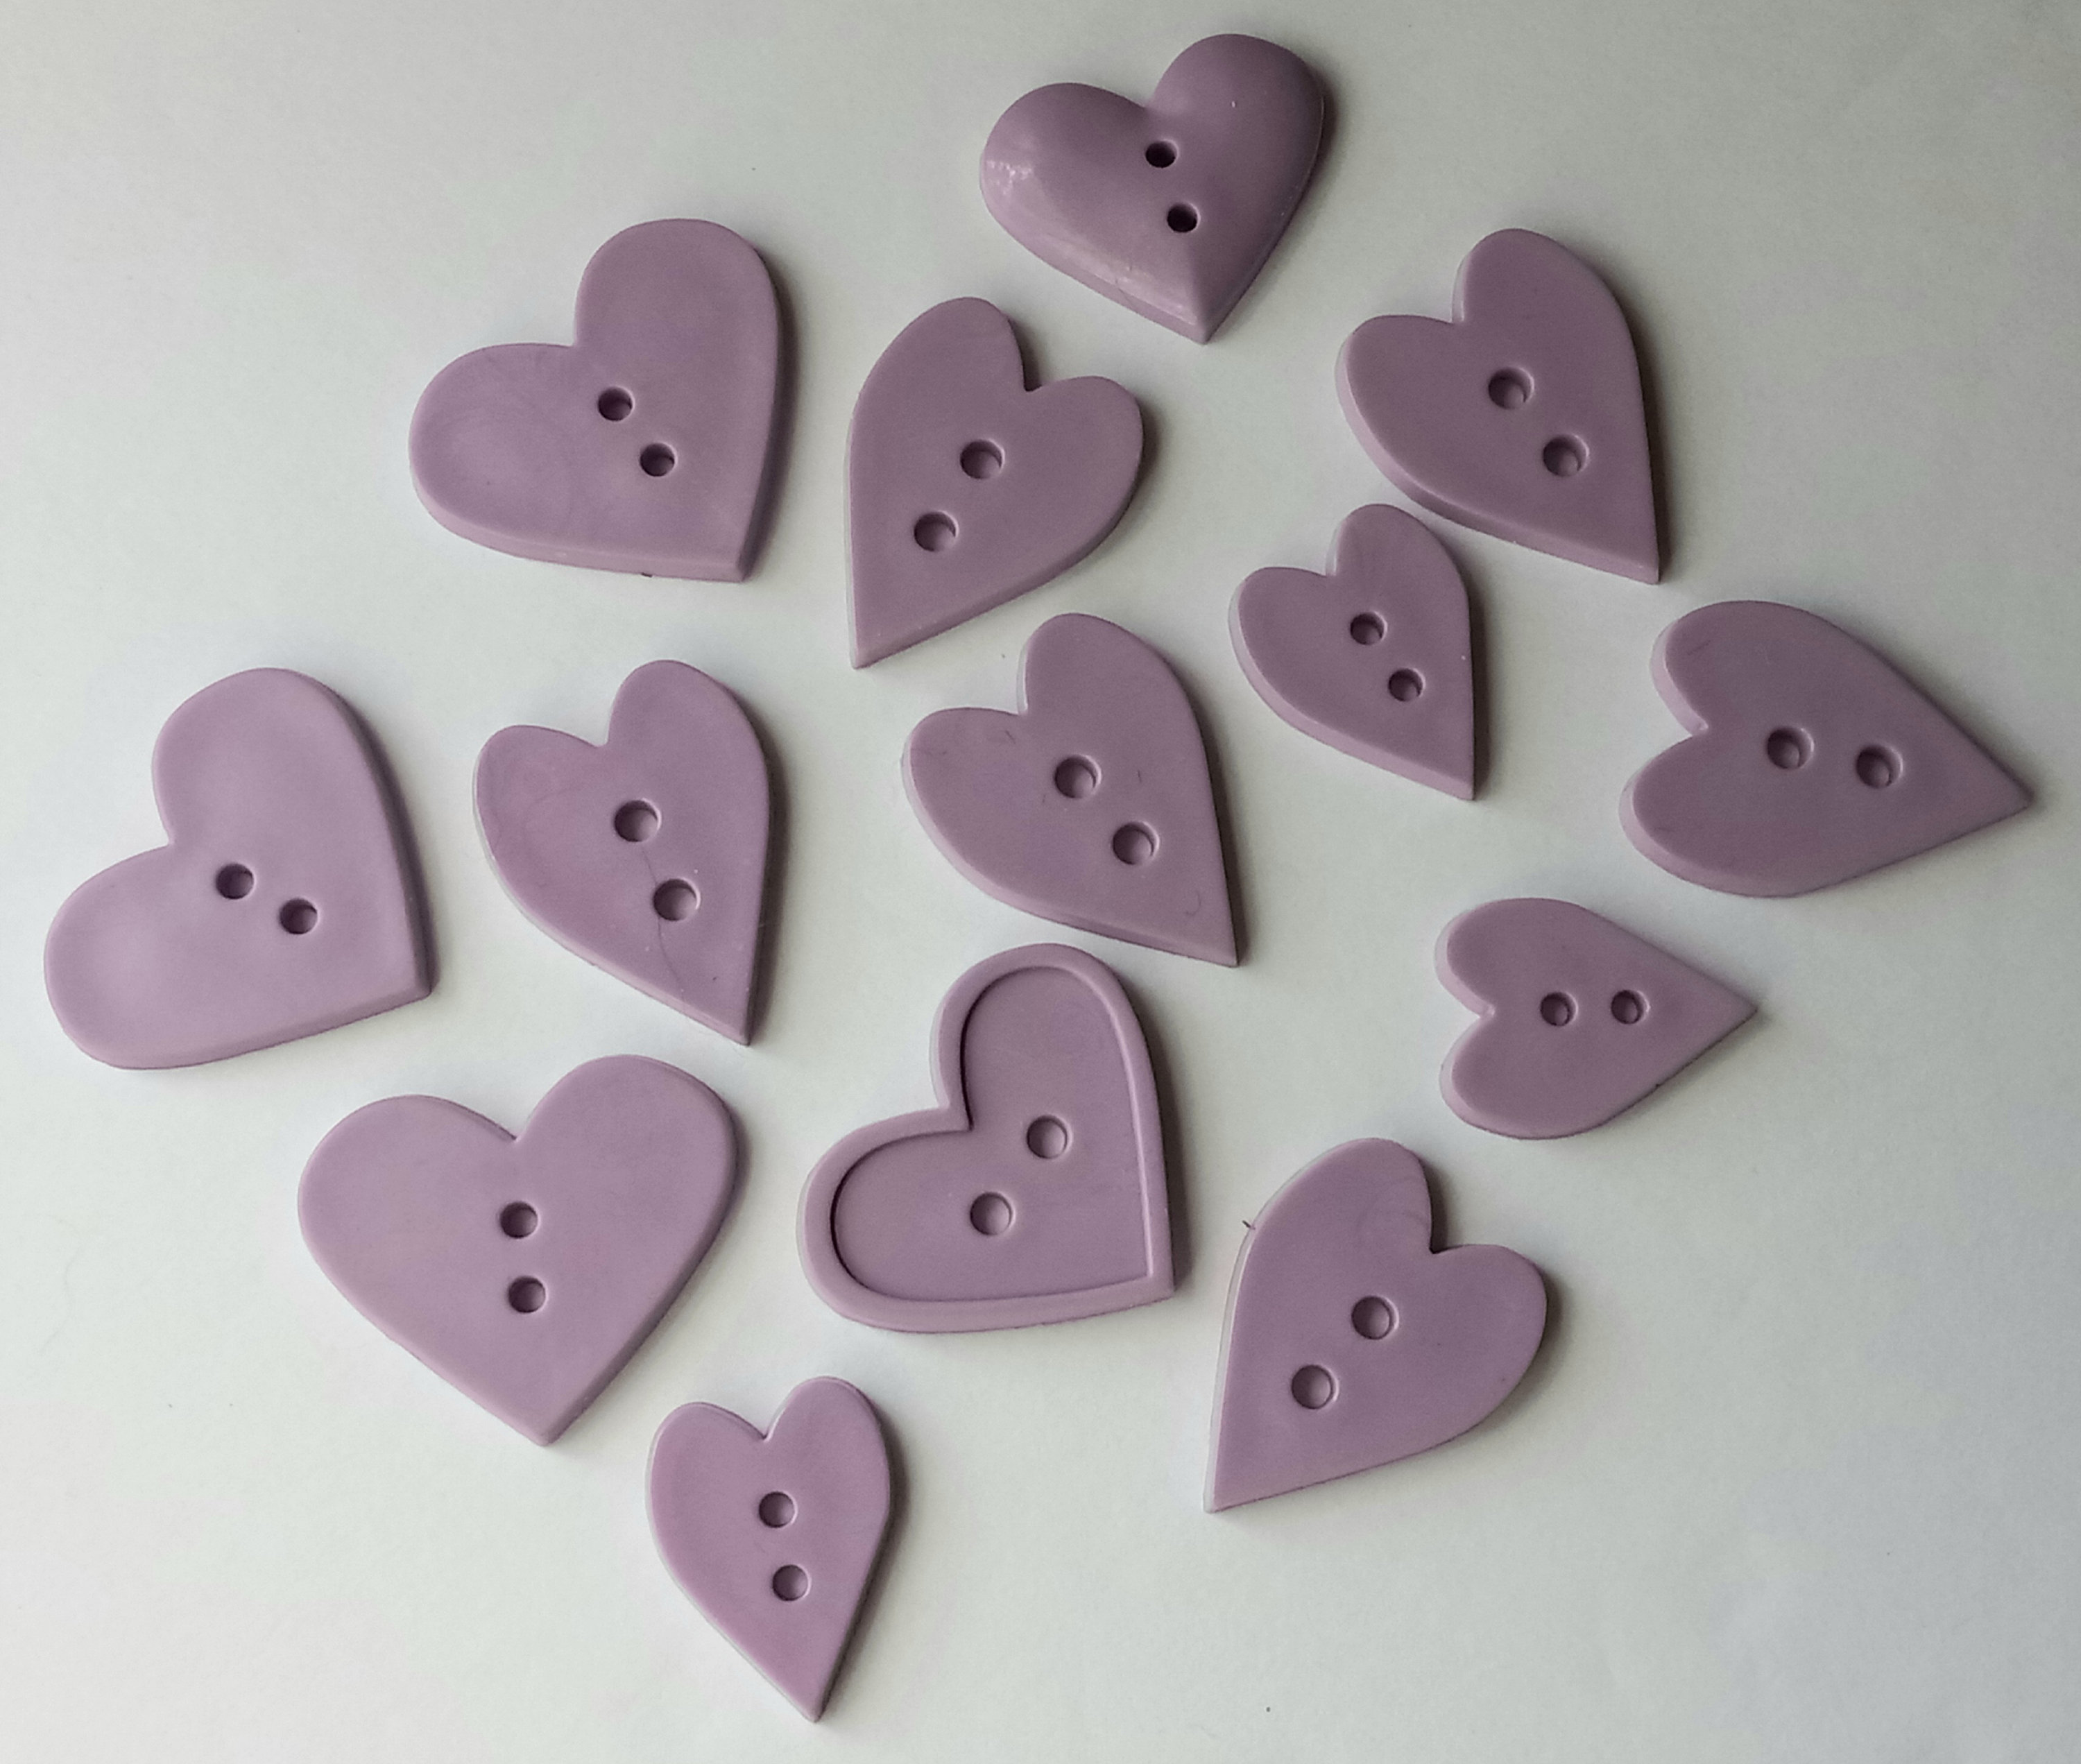  Meetppy 200pcs 14MM Heart Shaped Multicolor 2 Holes Plastic  Sewing Buttons for Sewing Scrapbooking Knitting